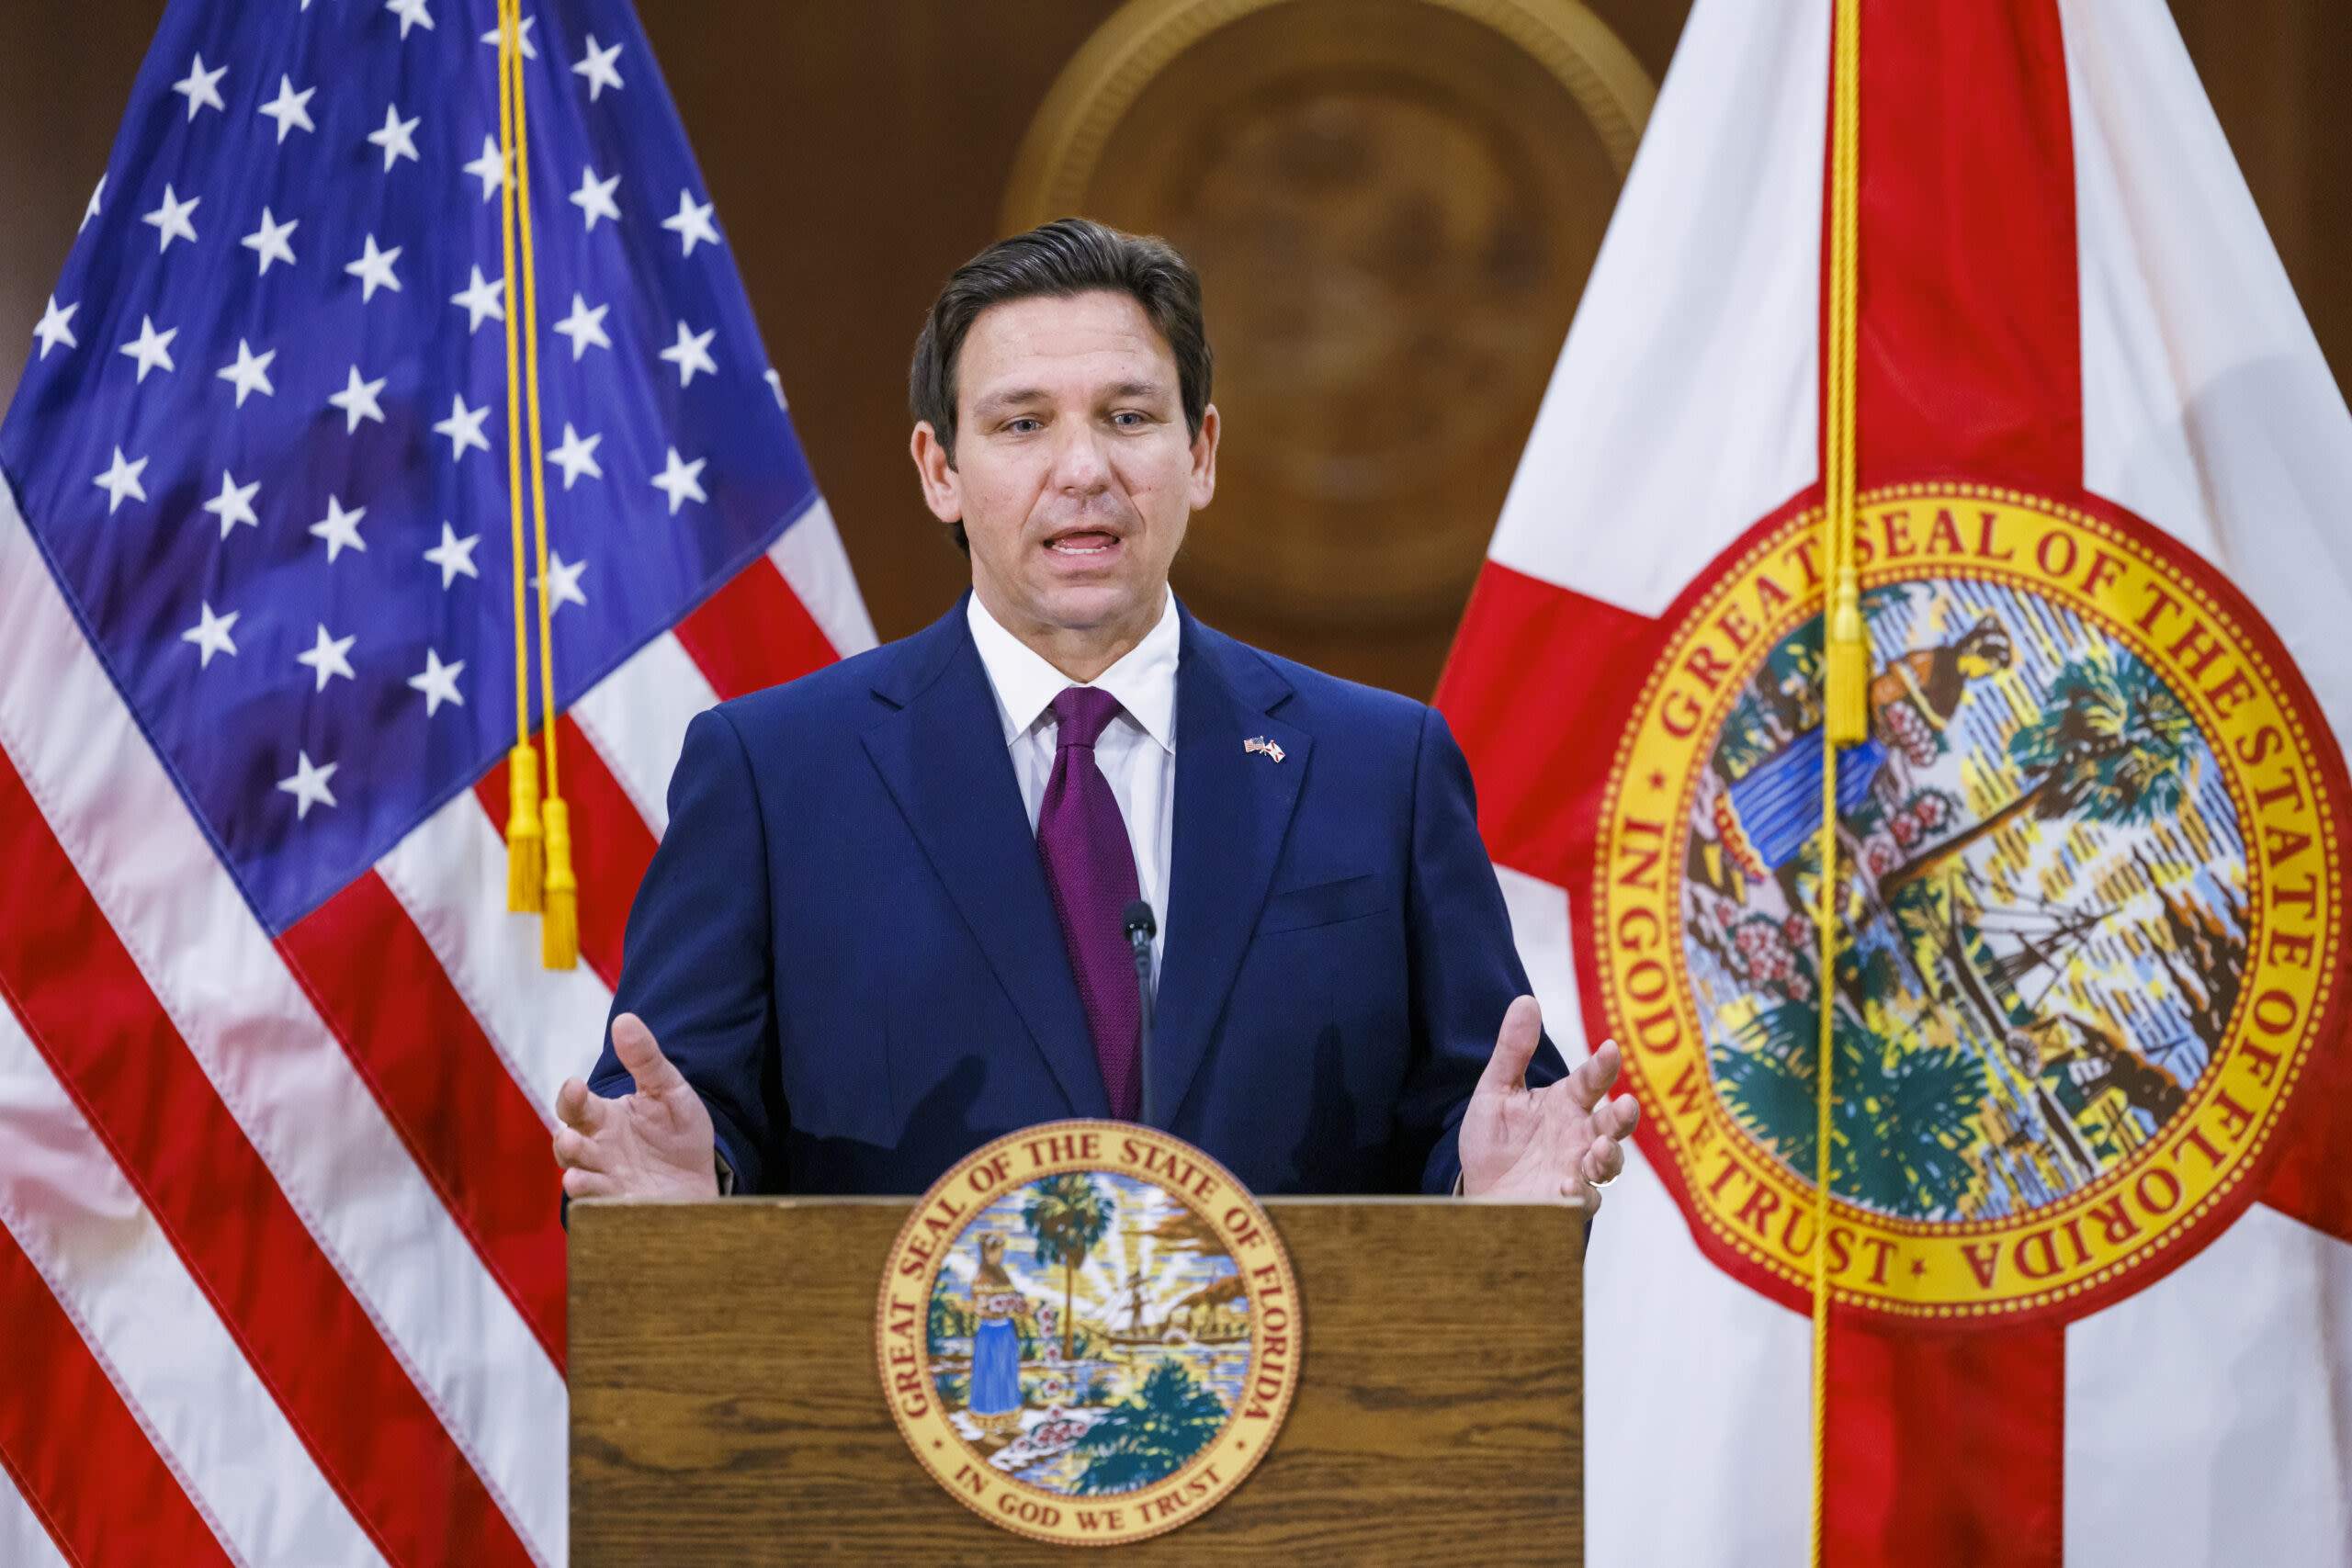 Ron DeSantis says Hamas sympathizers 'rule the roost' at universities